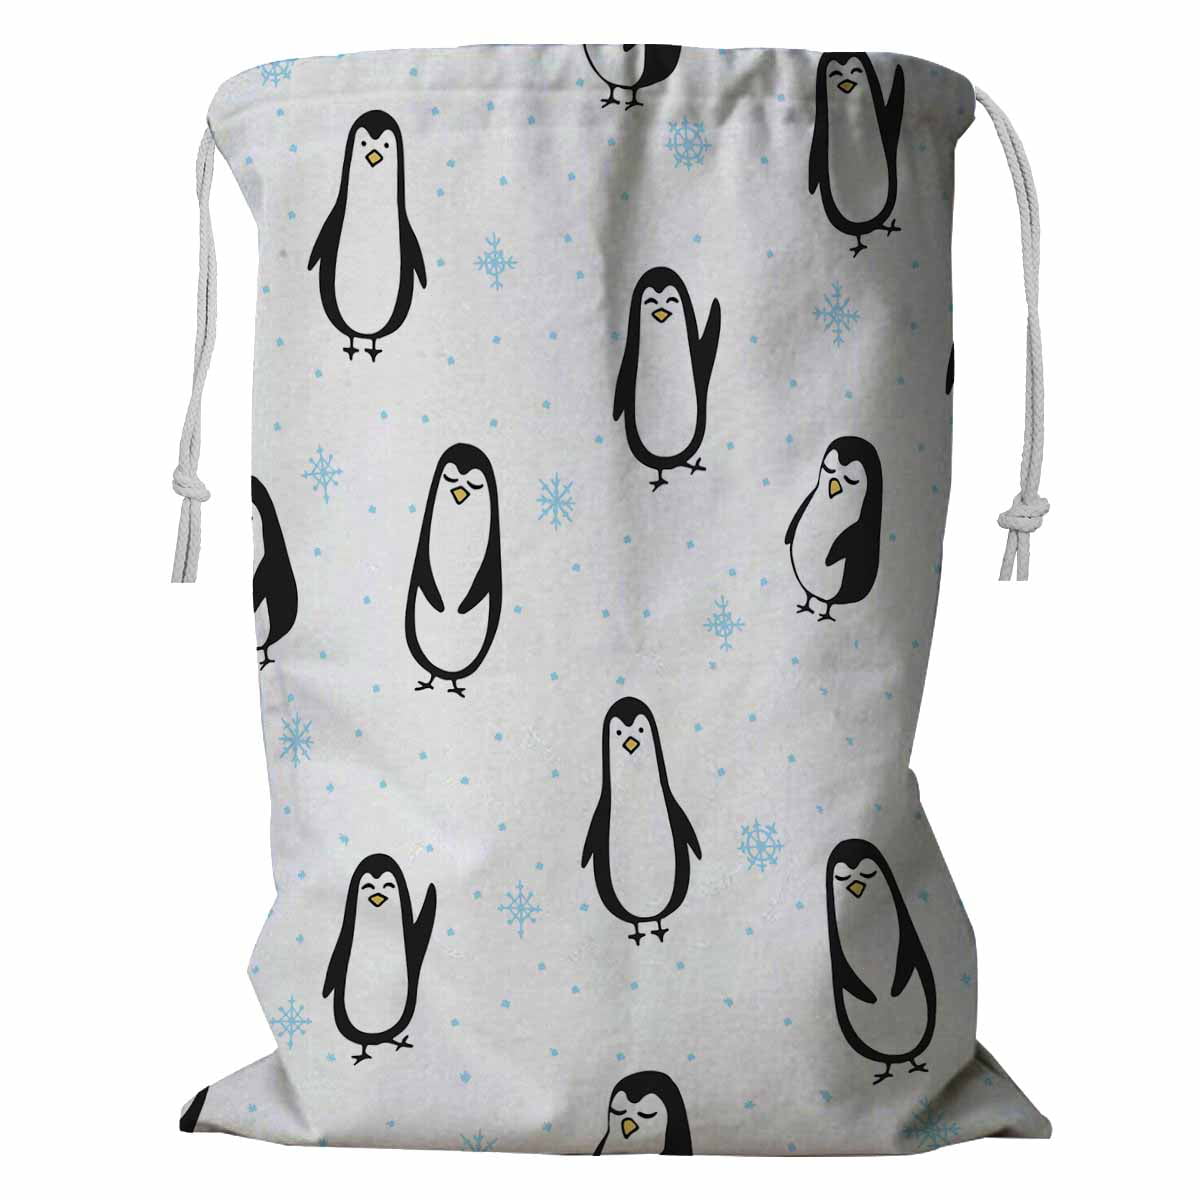 PKQWTM Funny Penguin Storage Basket Laundry Bag with Drawstring Size 24x32  Inch 